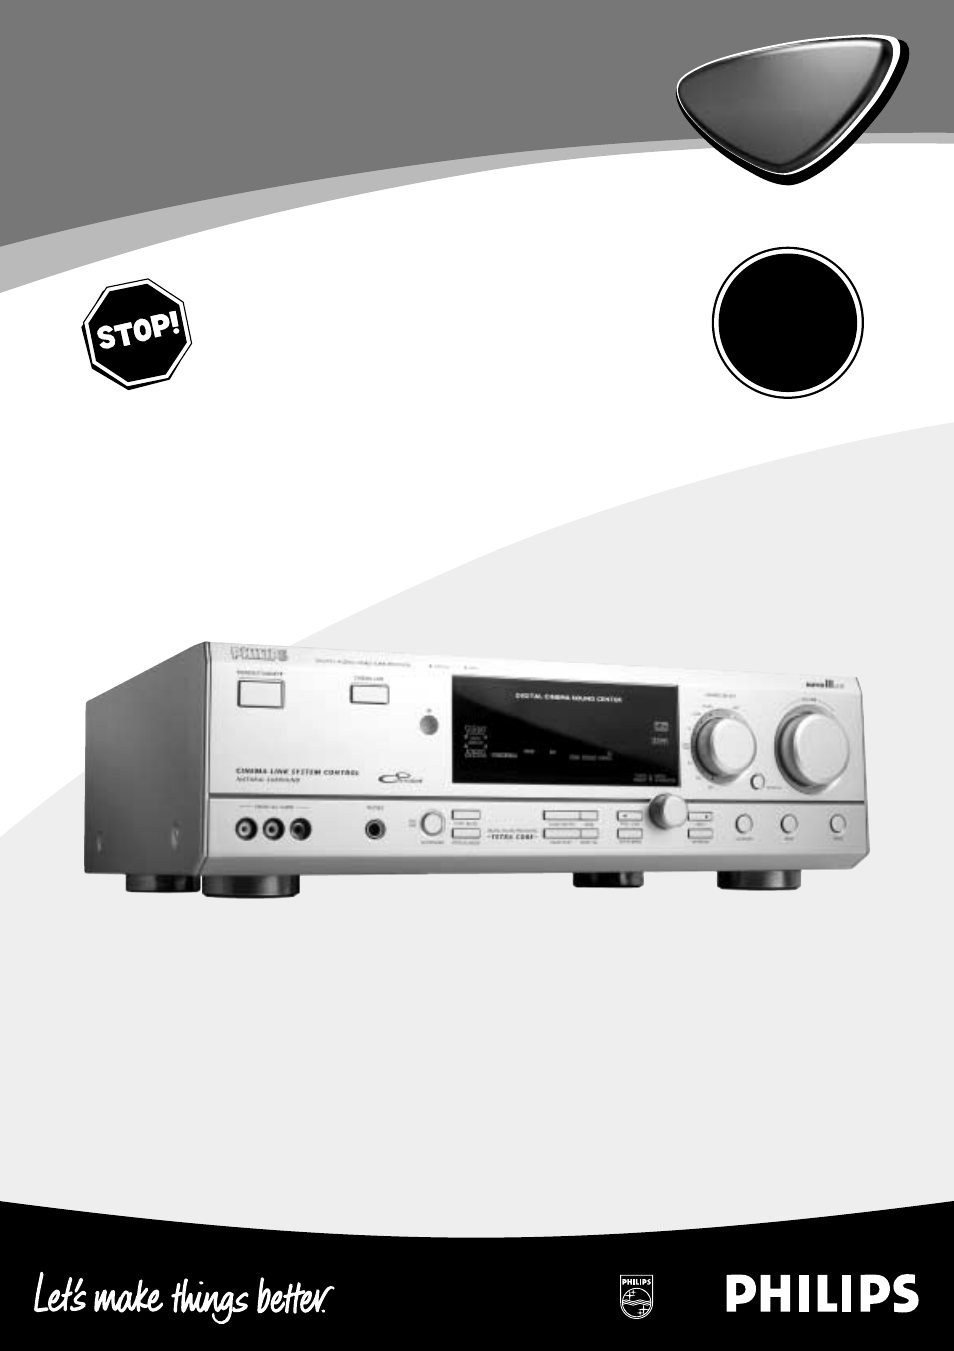 Philips FR-994 User Manual | 33 pages | Also for: FR-985, FR-996, FR-986,  FR-995, FR-963, MX9703799, FR99617S99, MX999D, MX9993798, FR99617S,  MX9703798, MX970D, MX99937, RECEIVER, MX97037